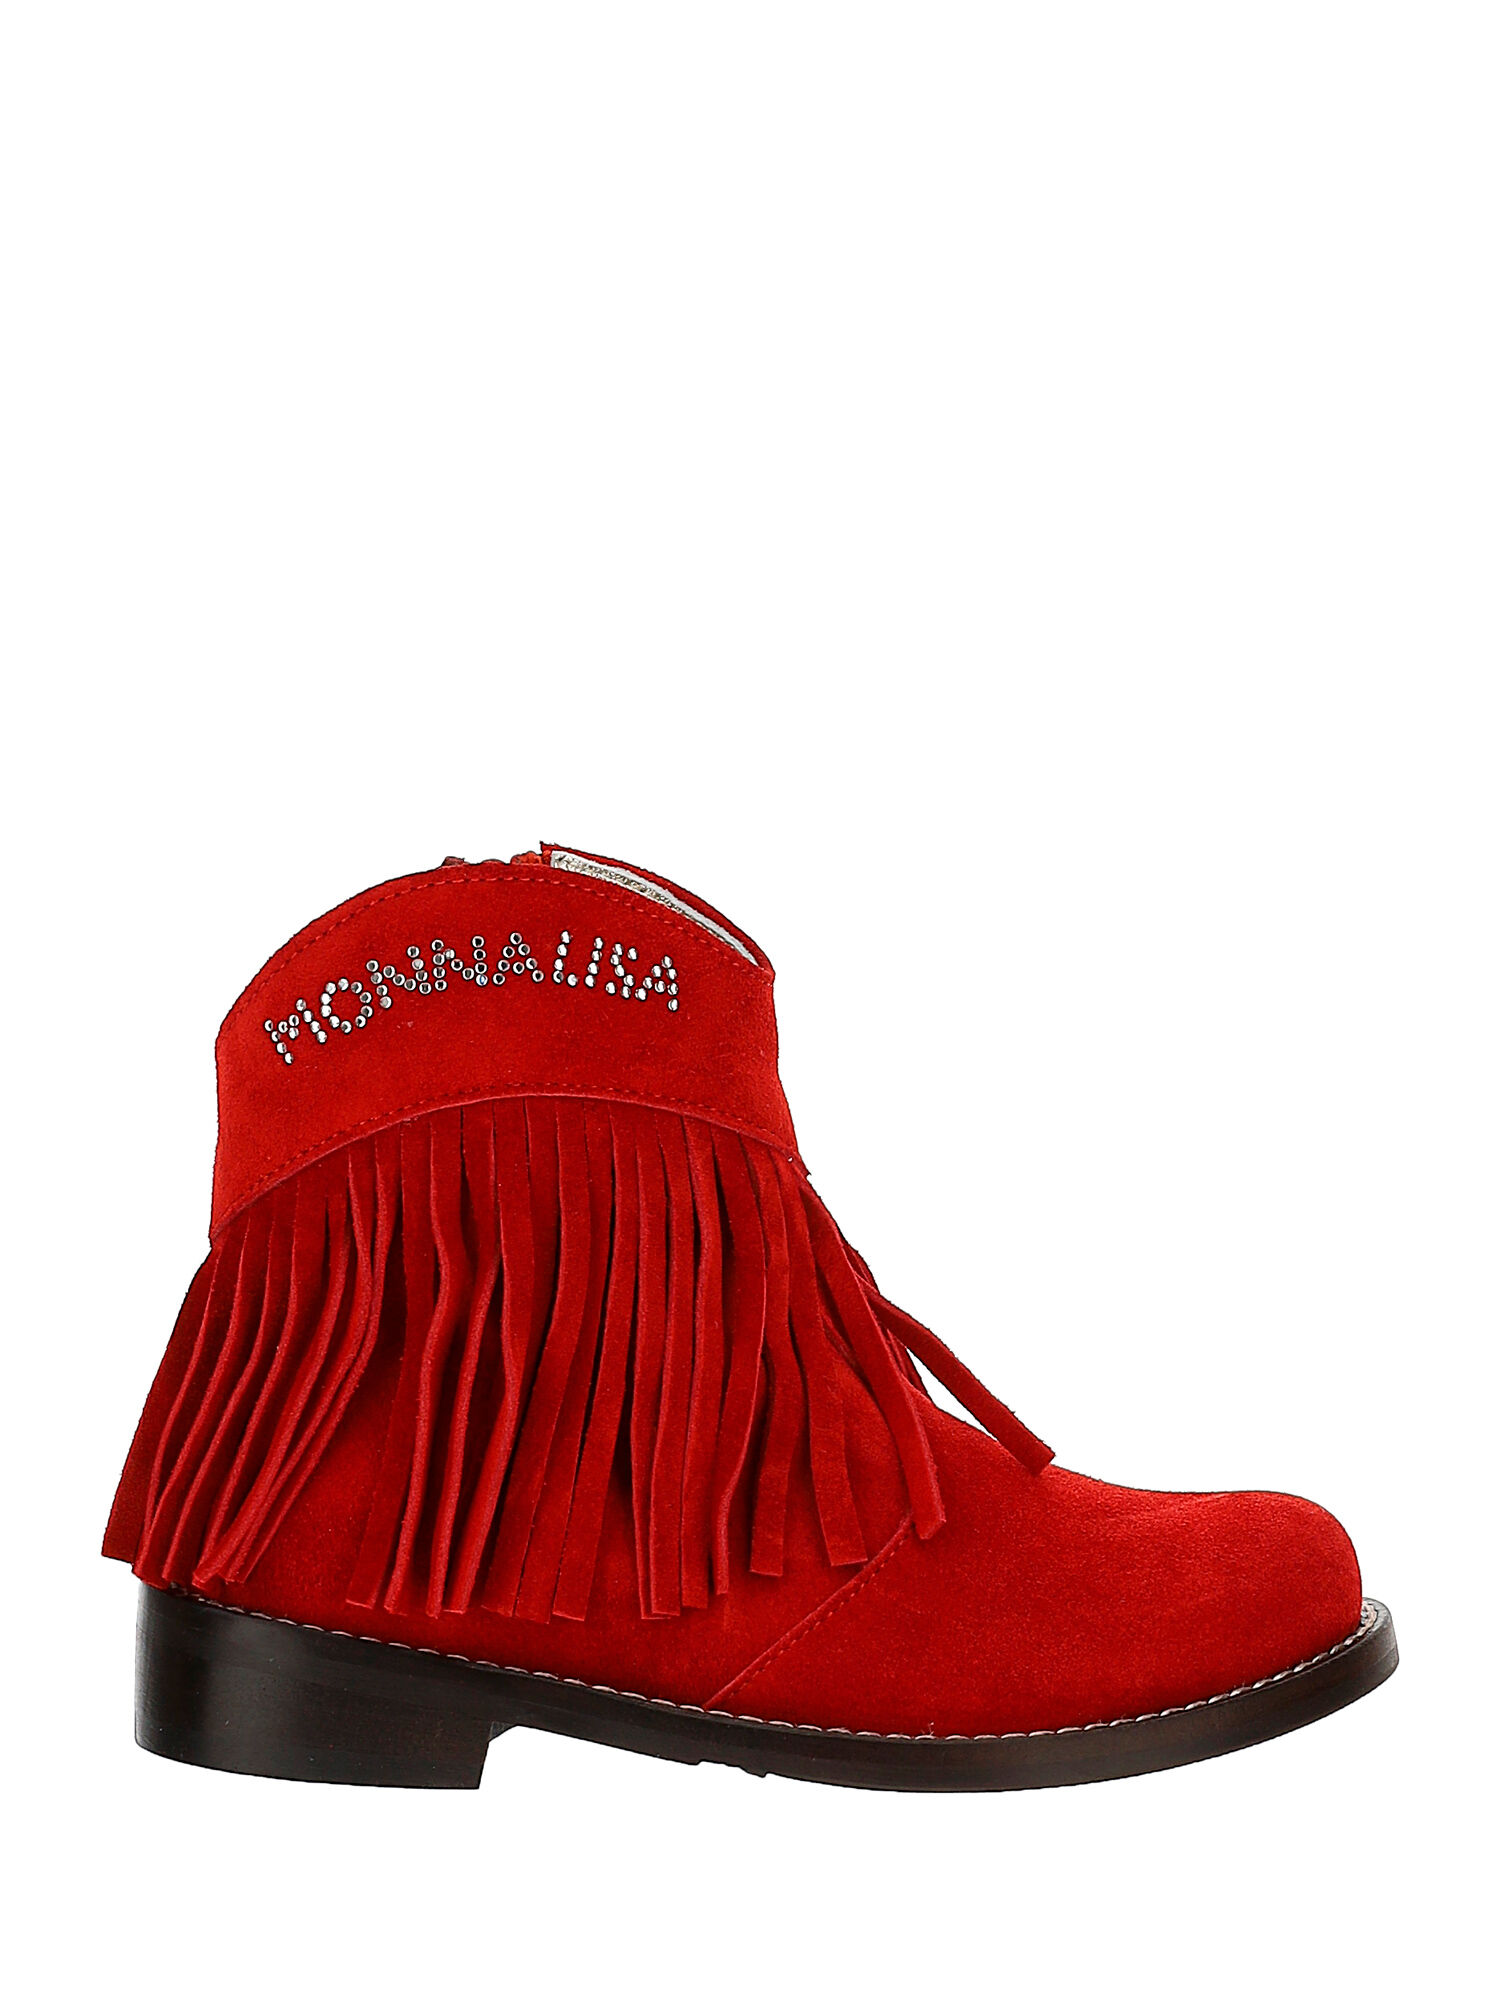 Monnalisa Girls Shoes Boots Ankle Boots Texan fringed suede 